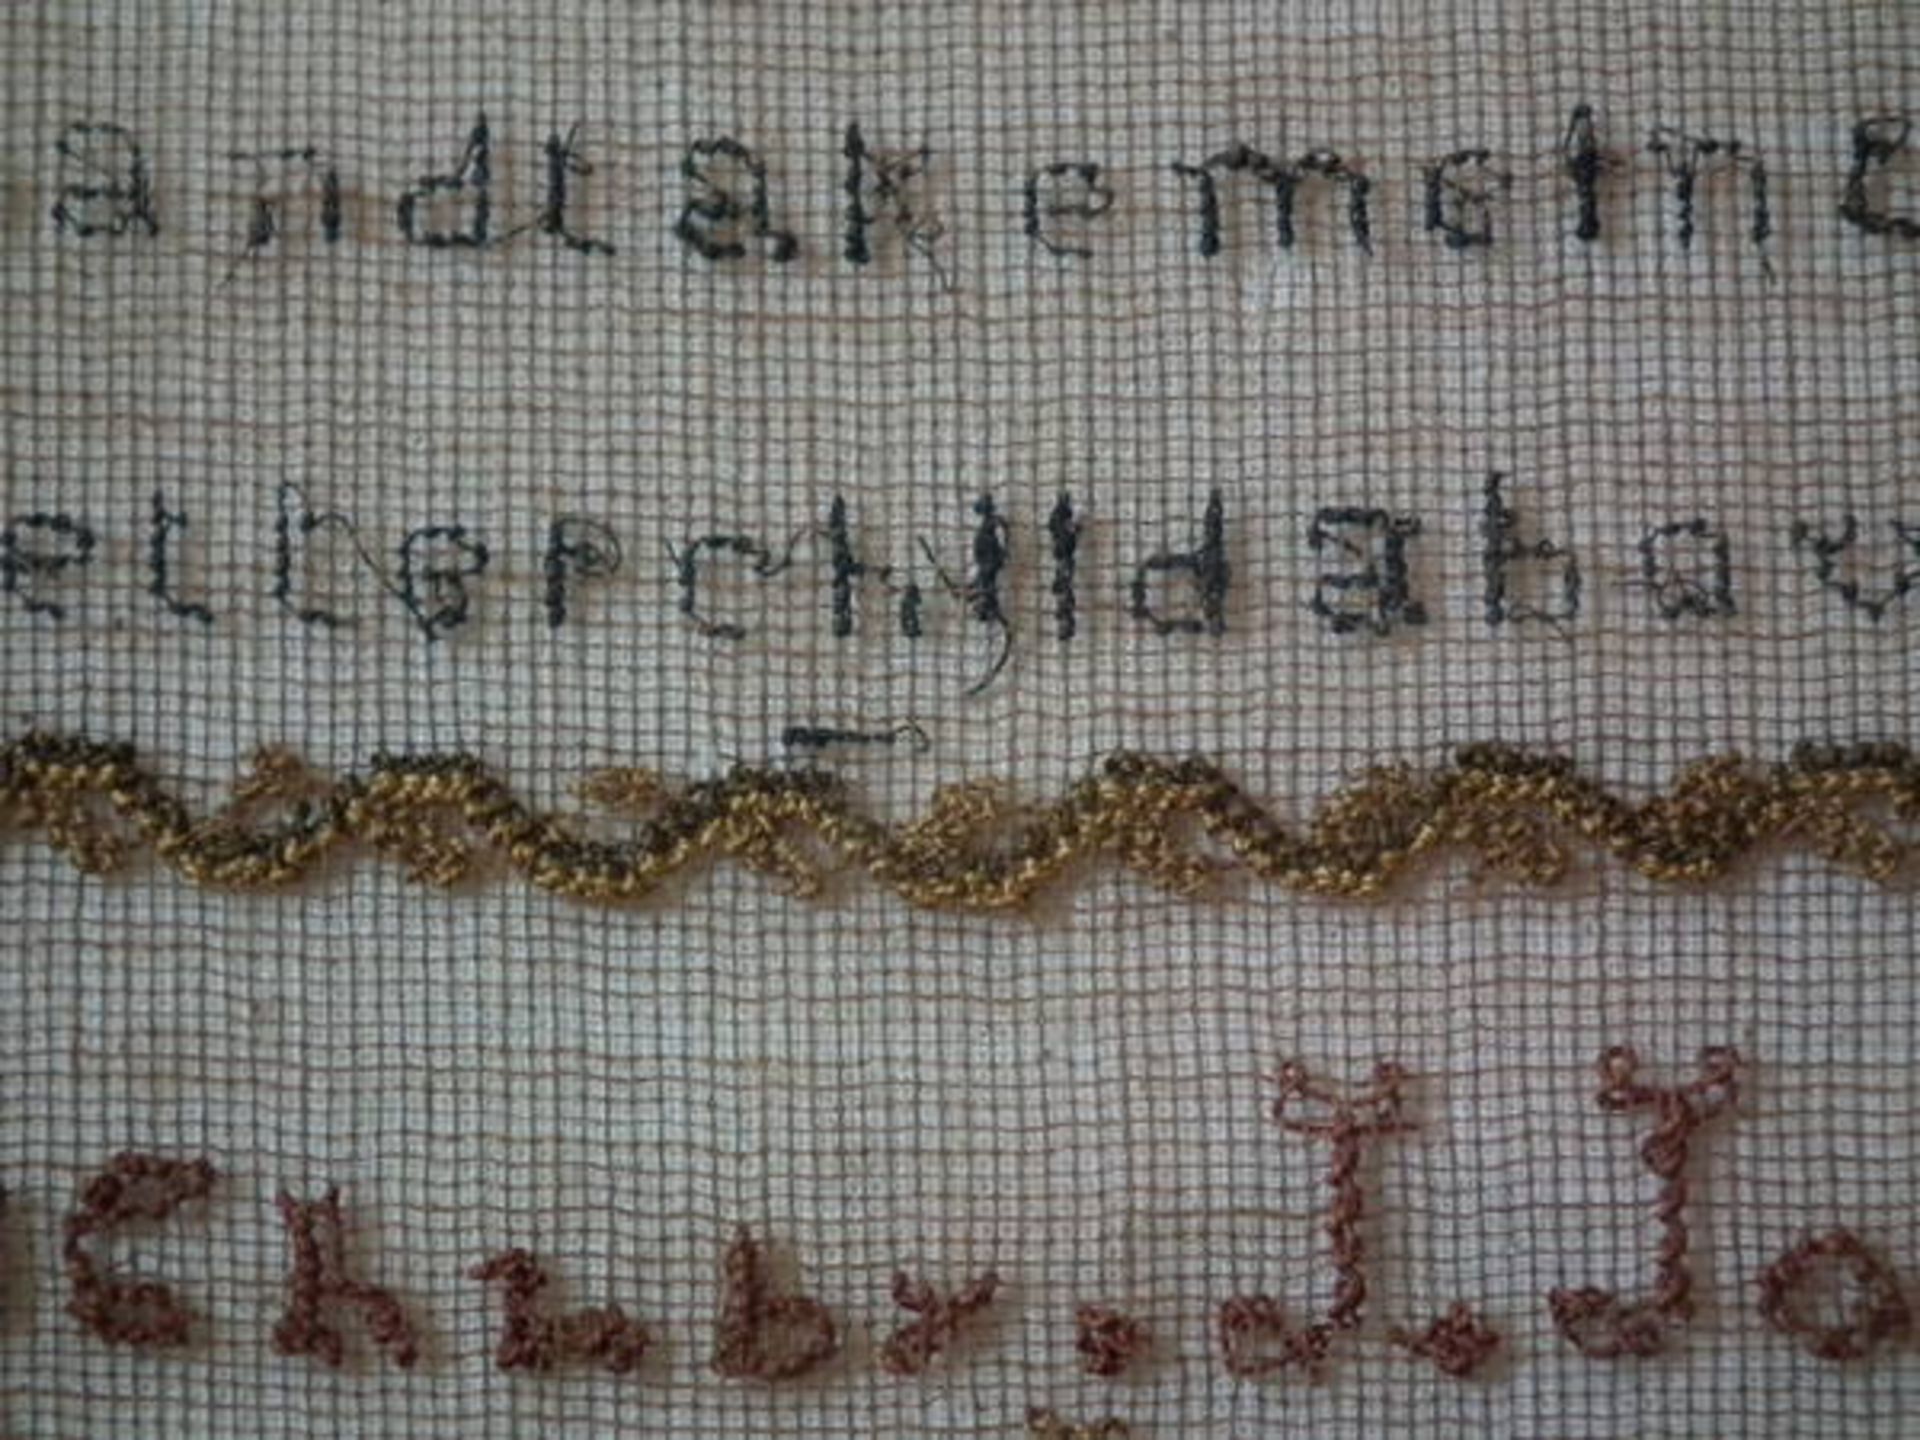 Needlework School Sampler dated 1843 by Sarah Bryan FREE UK DELIVERY - Image 21 of 38